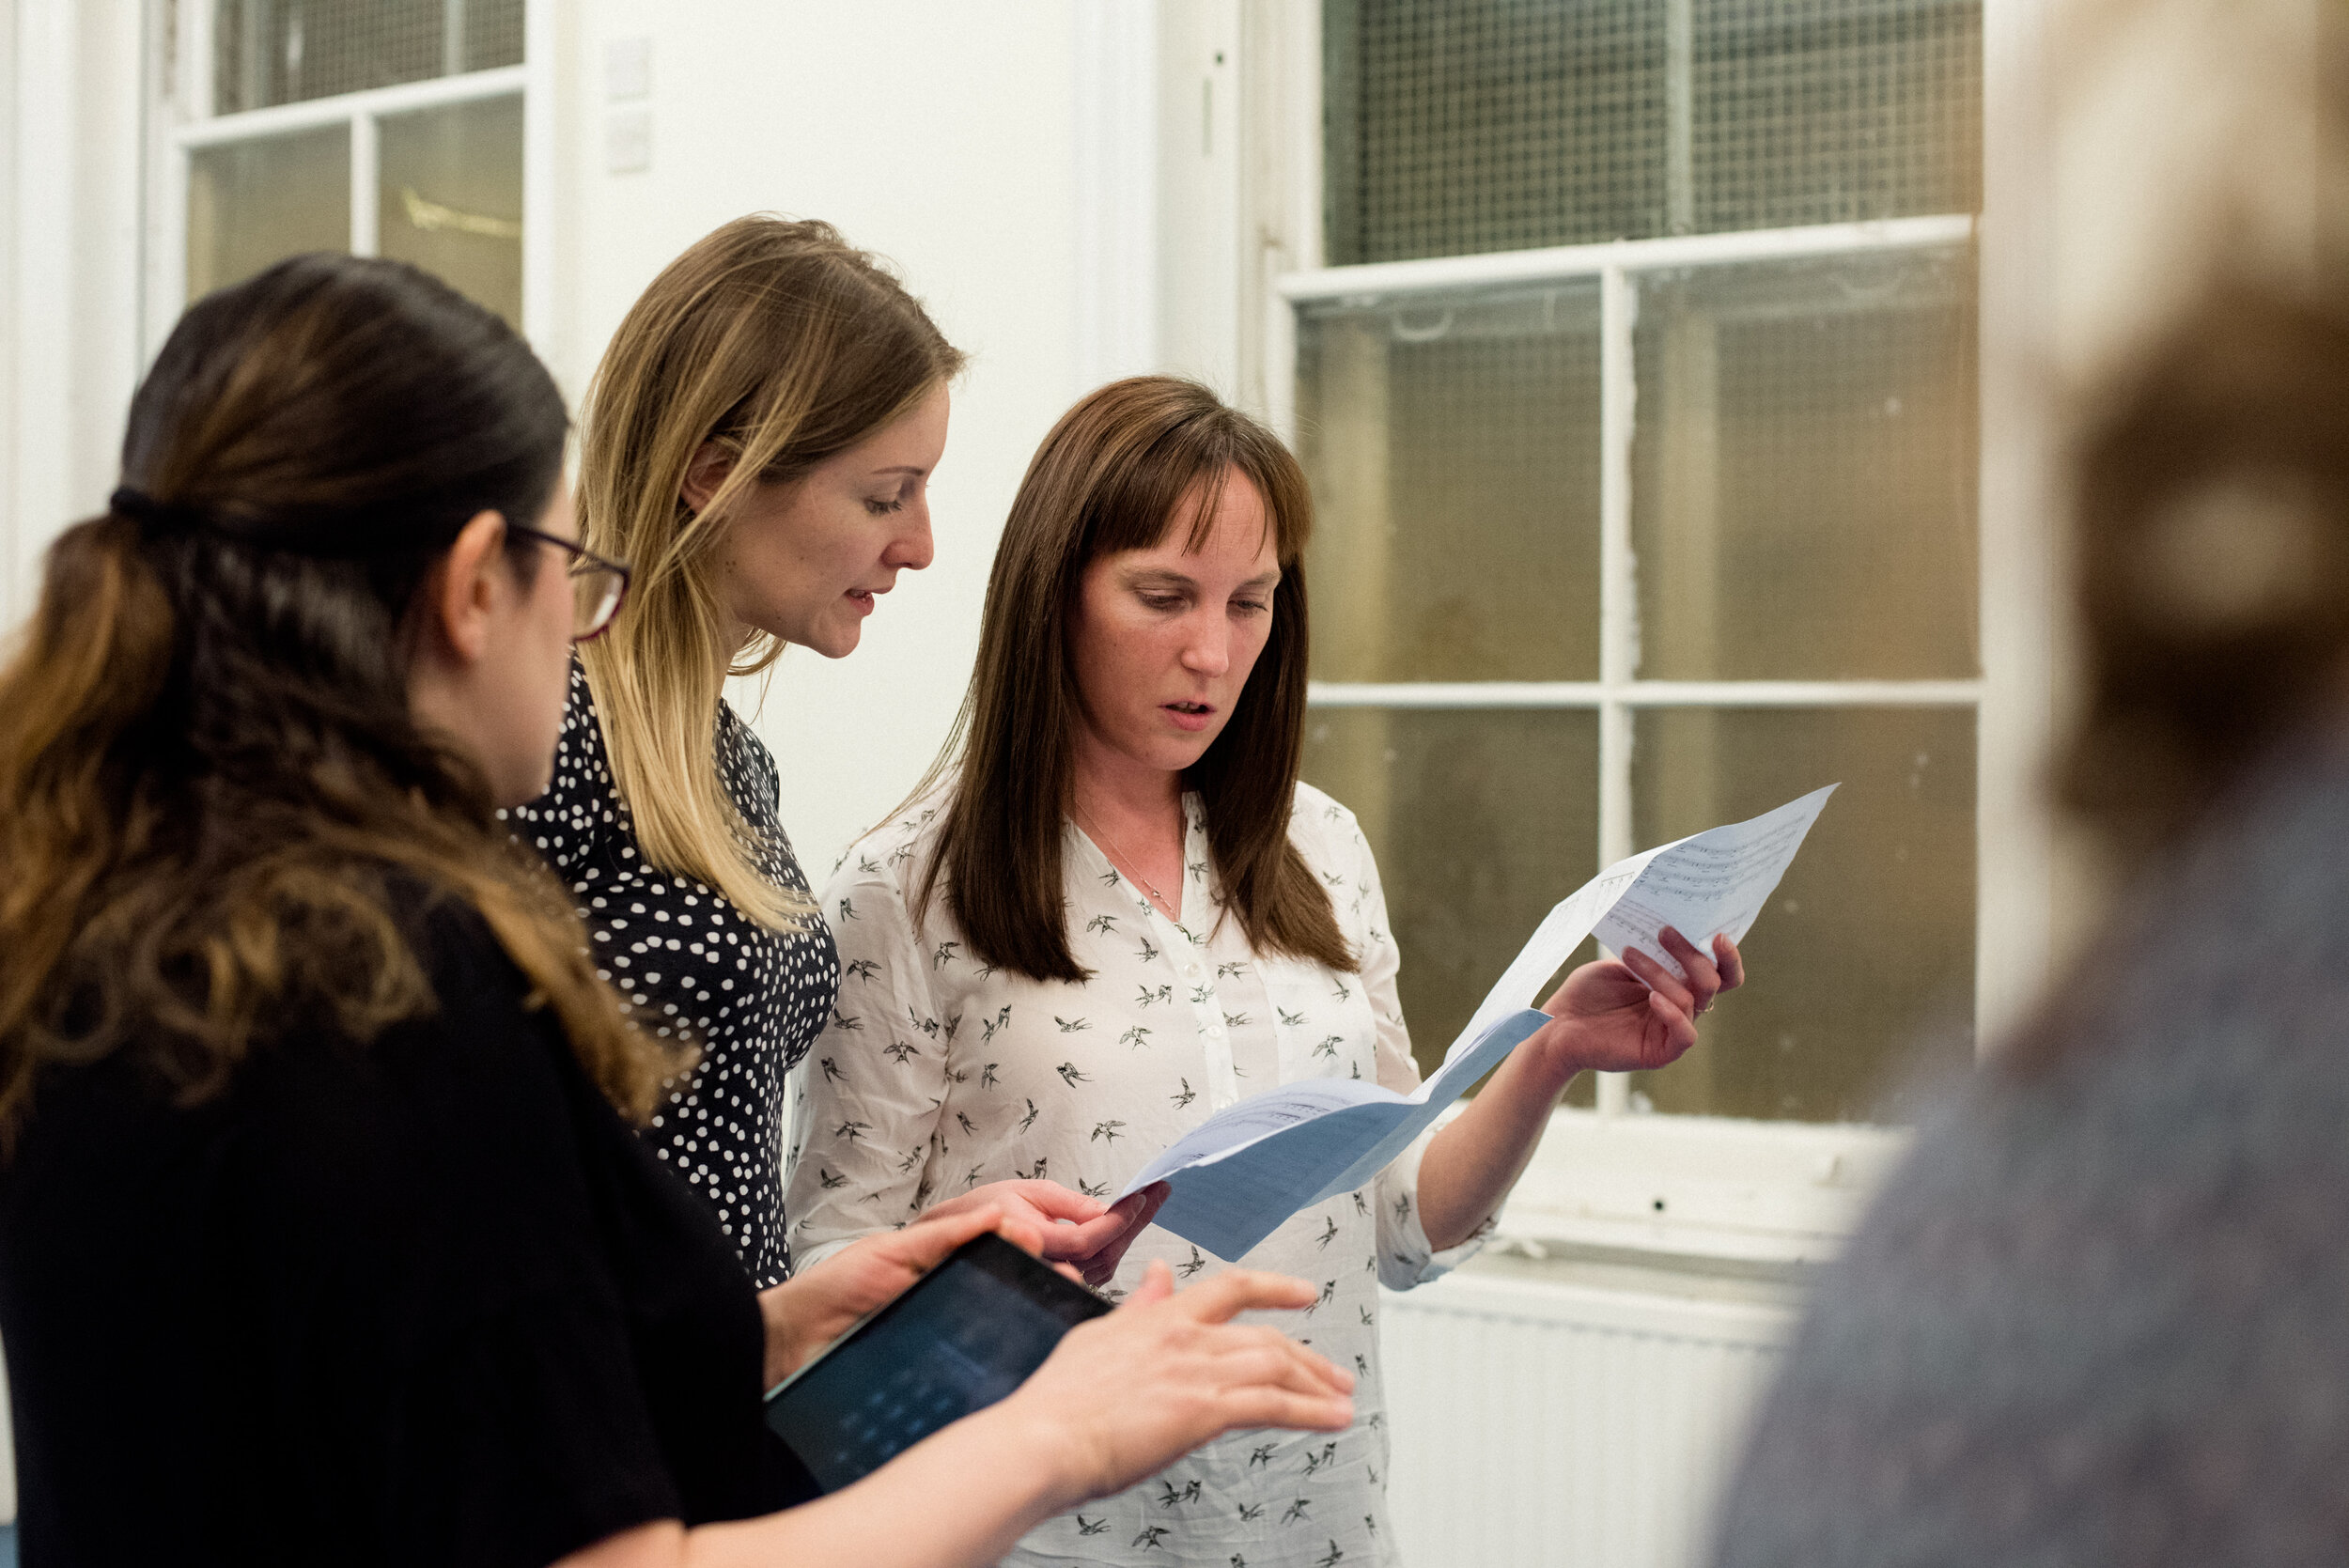 Starling Arts choir members work together in rehearsal @AlicetheCamera